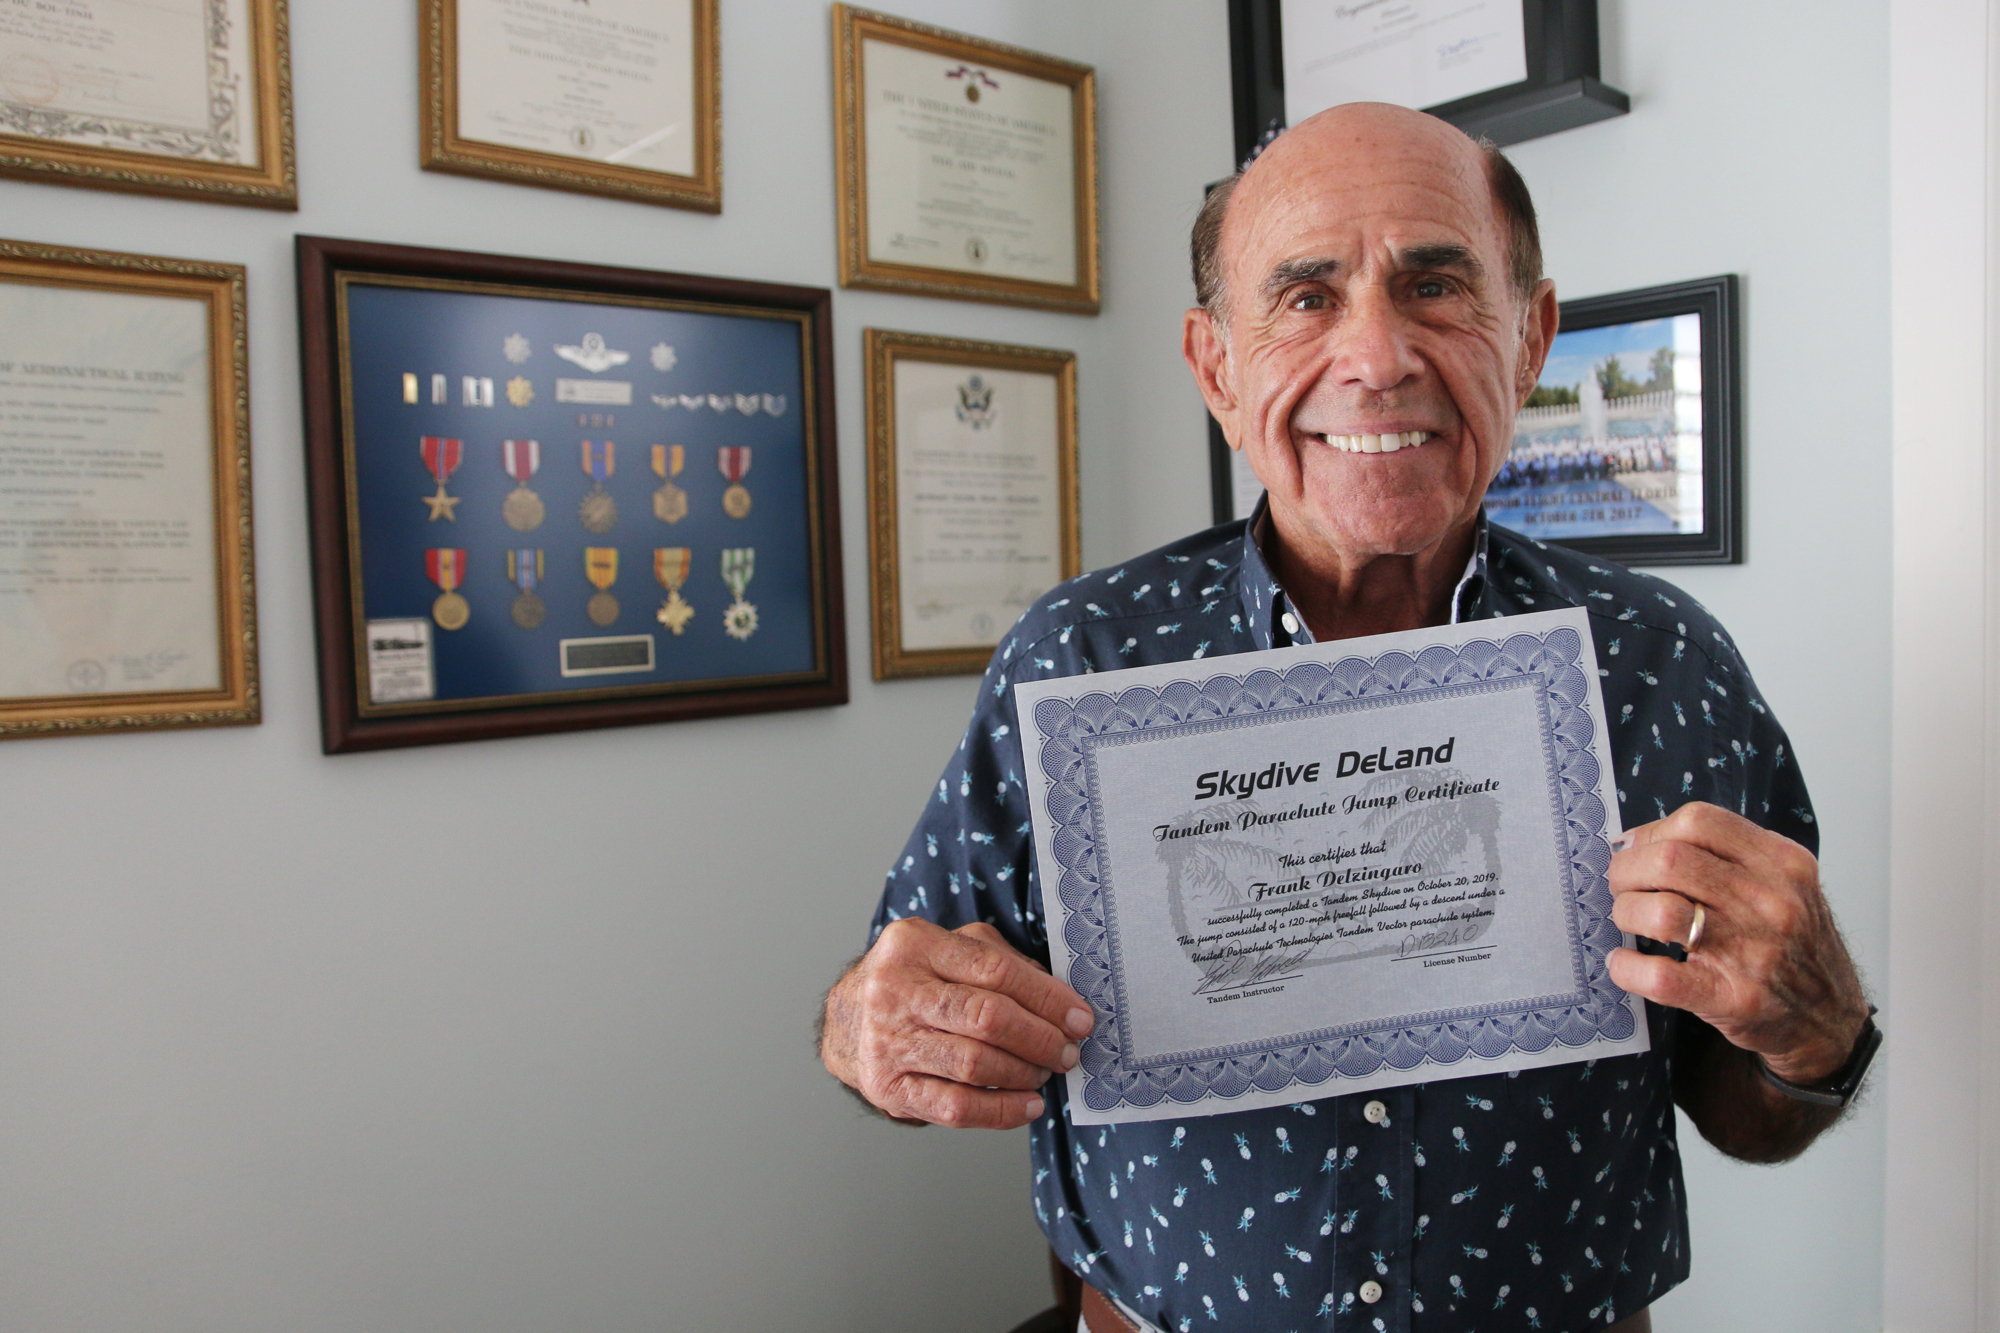 Frank Delzingaro has one more certificate to add to his wall of honors. Photo by Jarleene Almenas